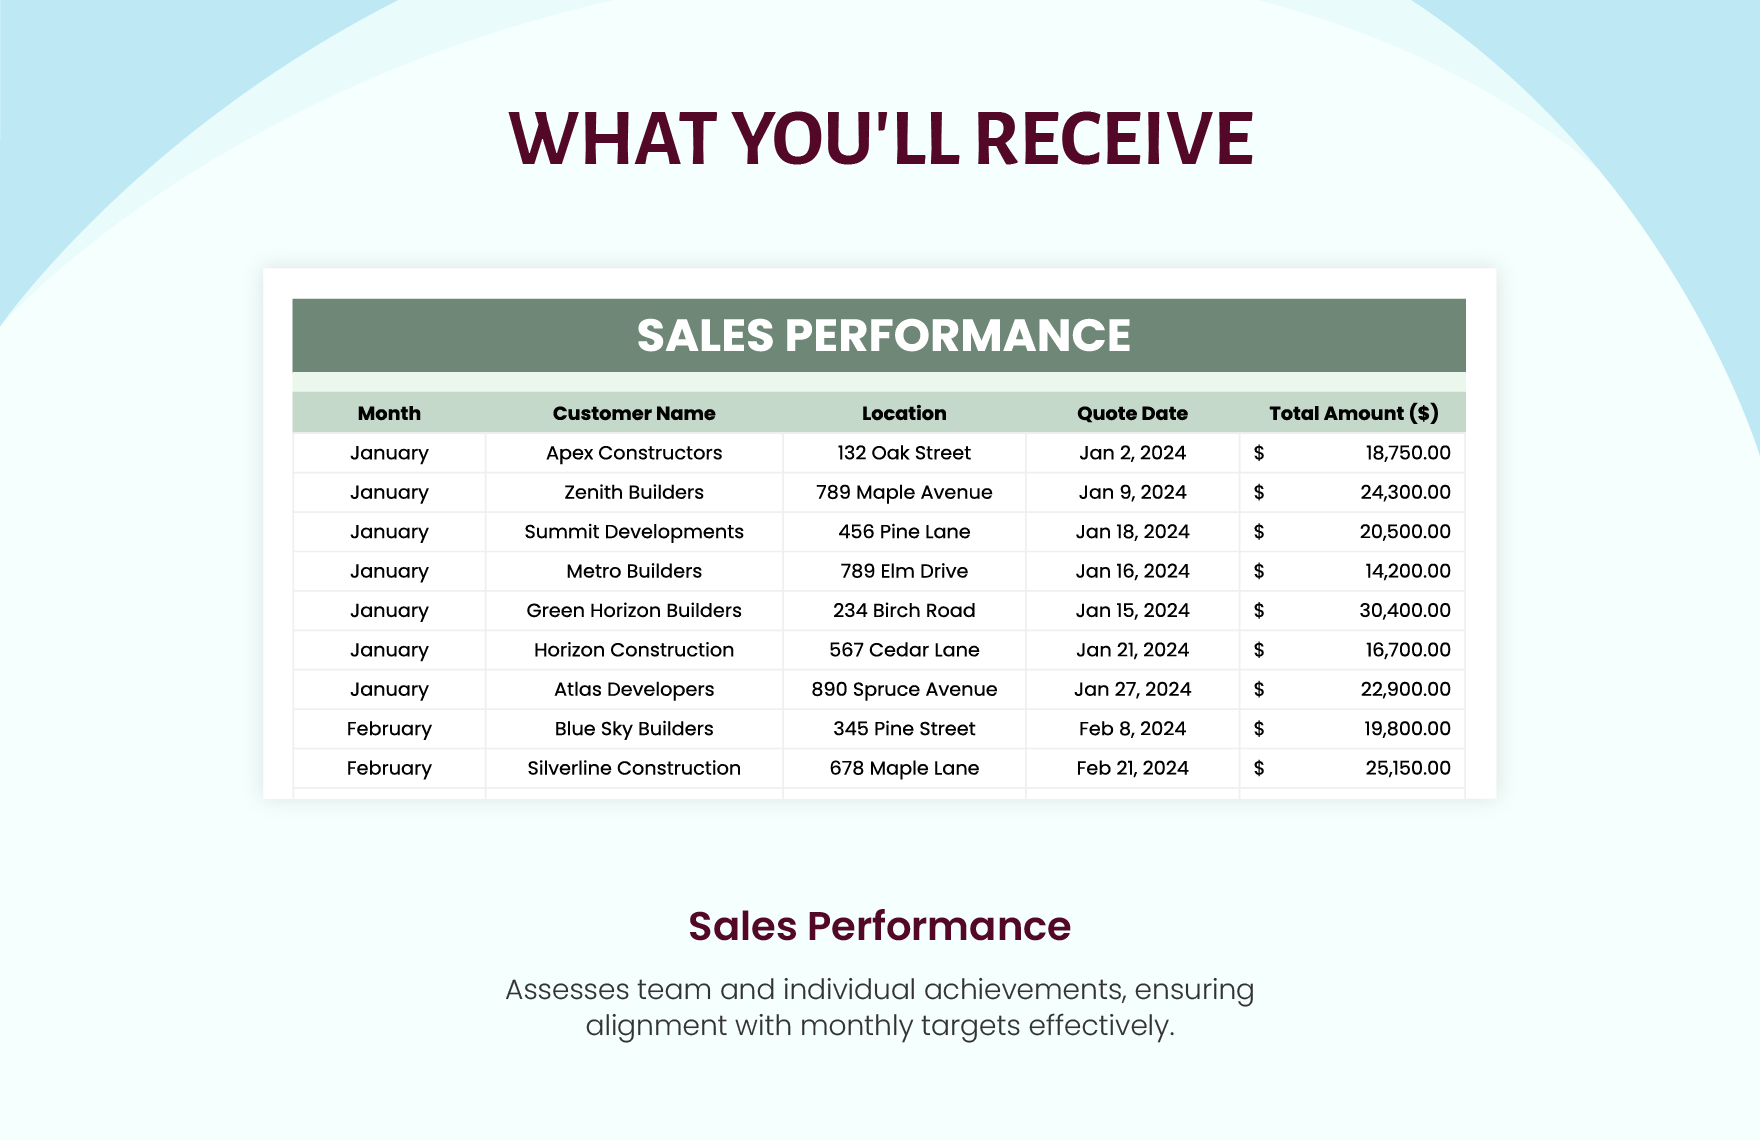 Sales Monthly Quote Analysis Template